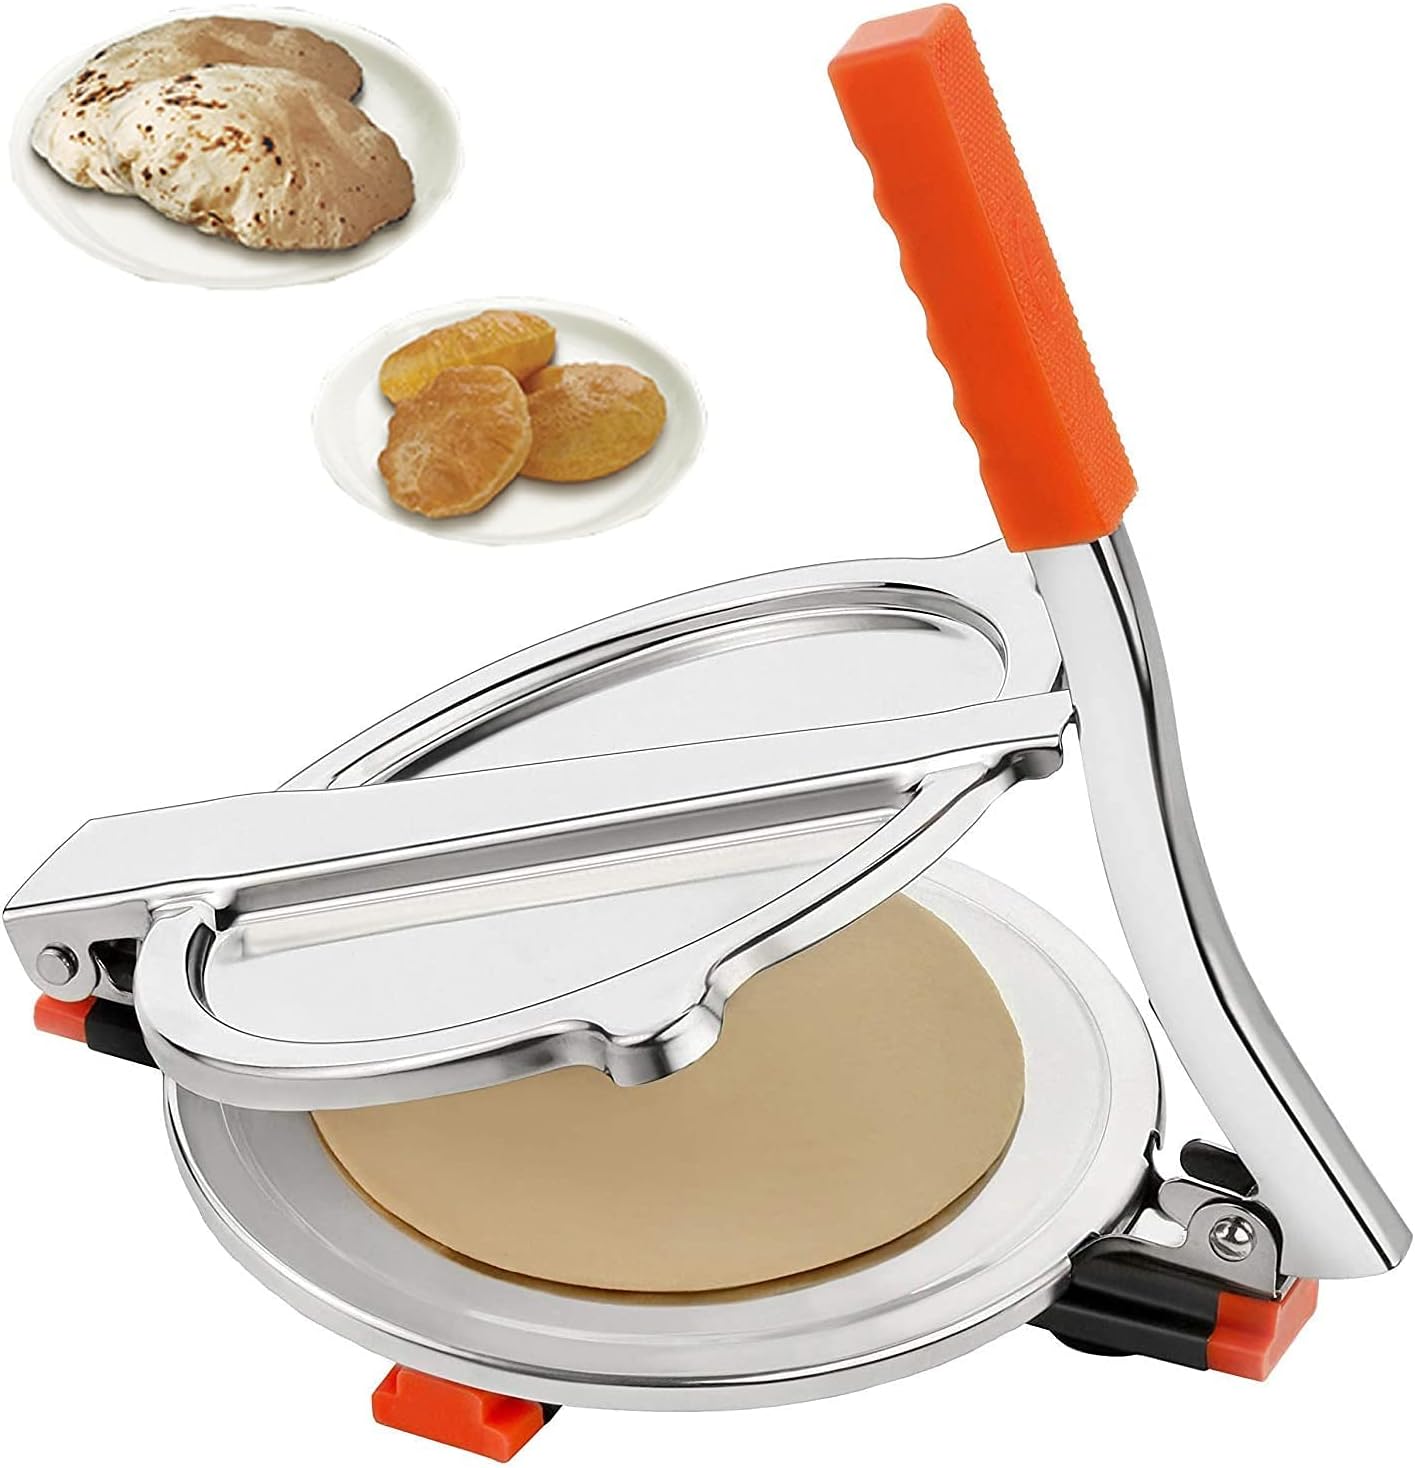 Stainless Steel 6.5 Inches Puri machine/Poori maker/Tortilla maker/Puri press/Roti Chapati Paratha Maker/you need to greese dough ball and press Gently for making thin Poori